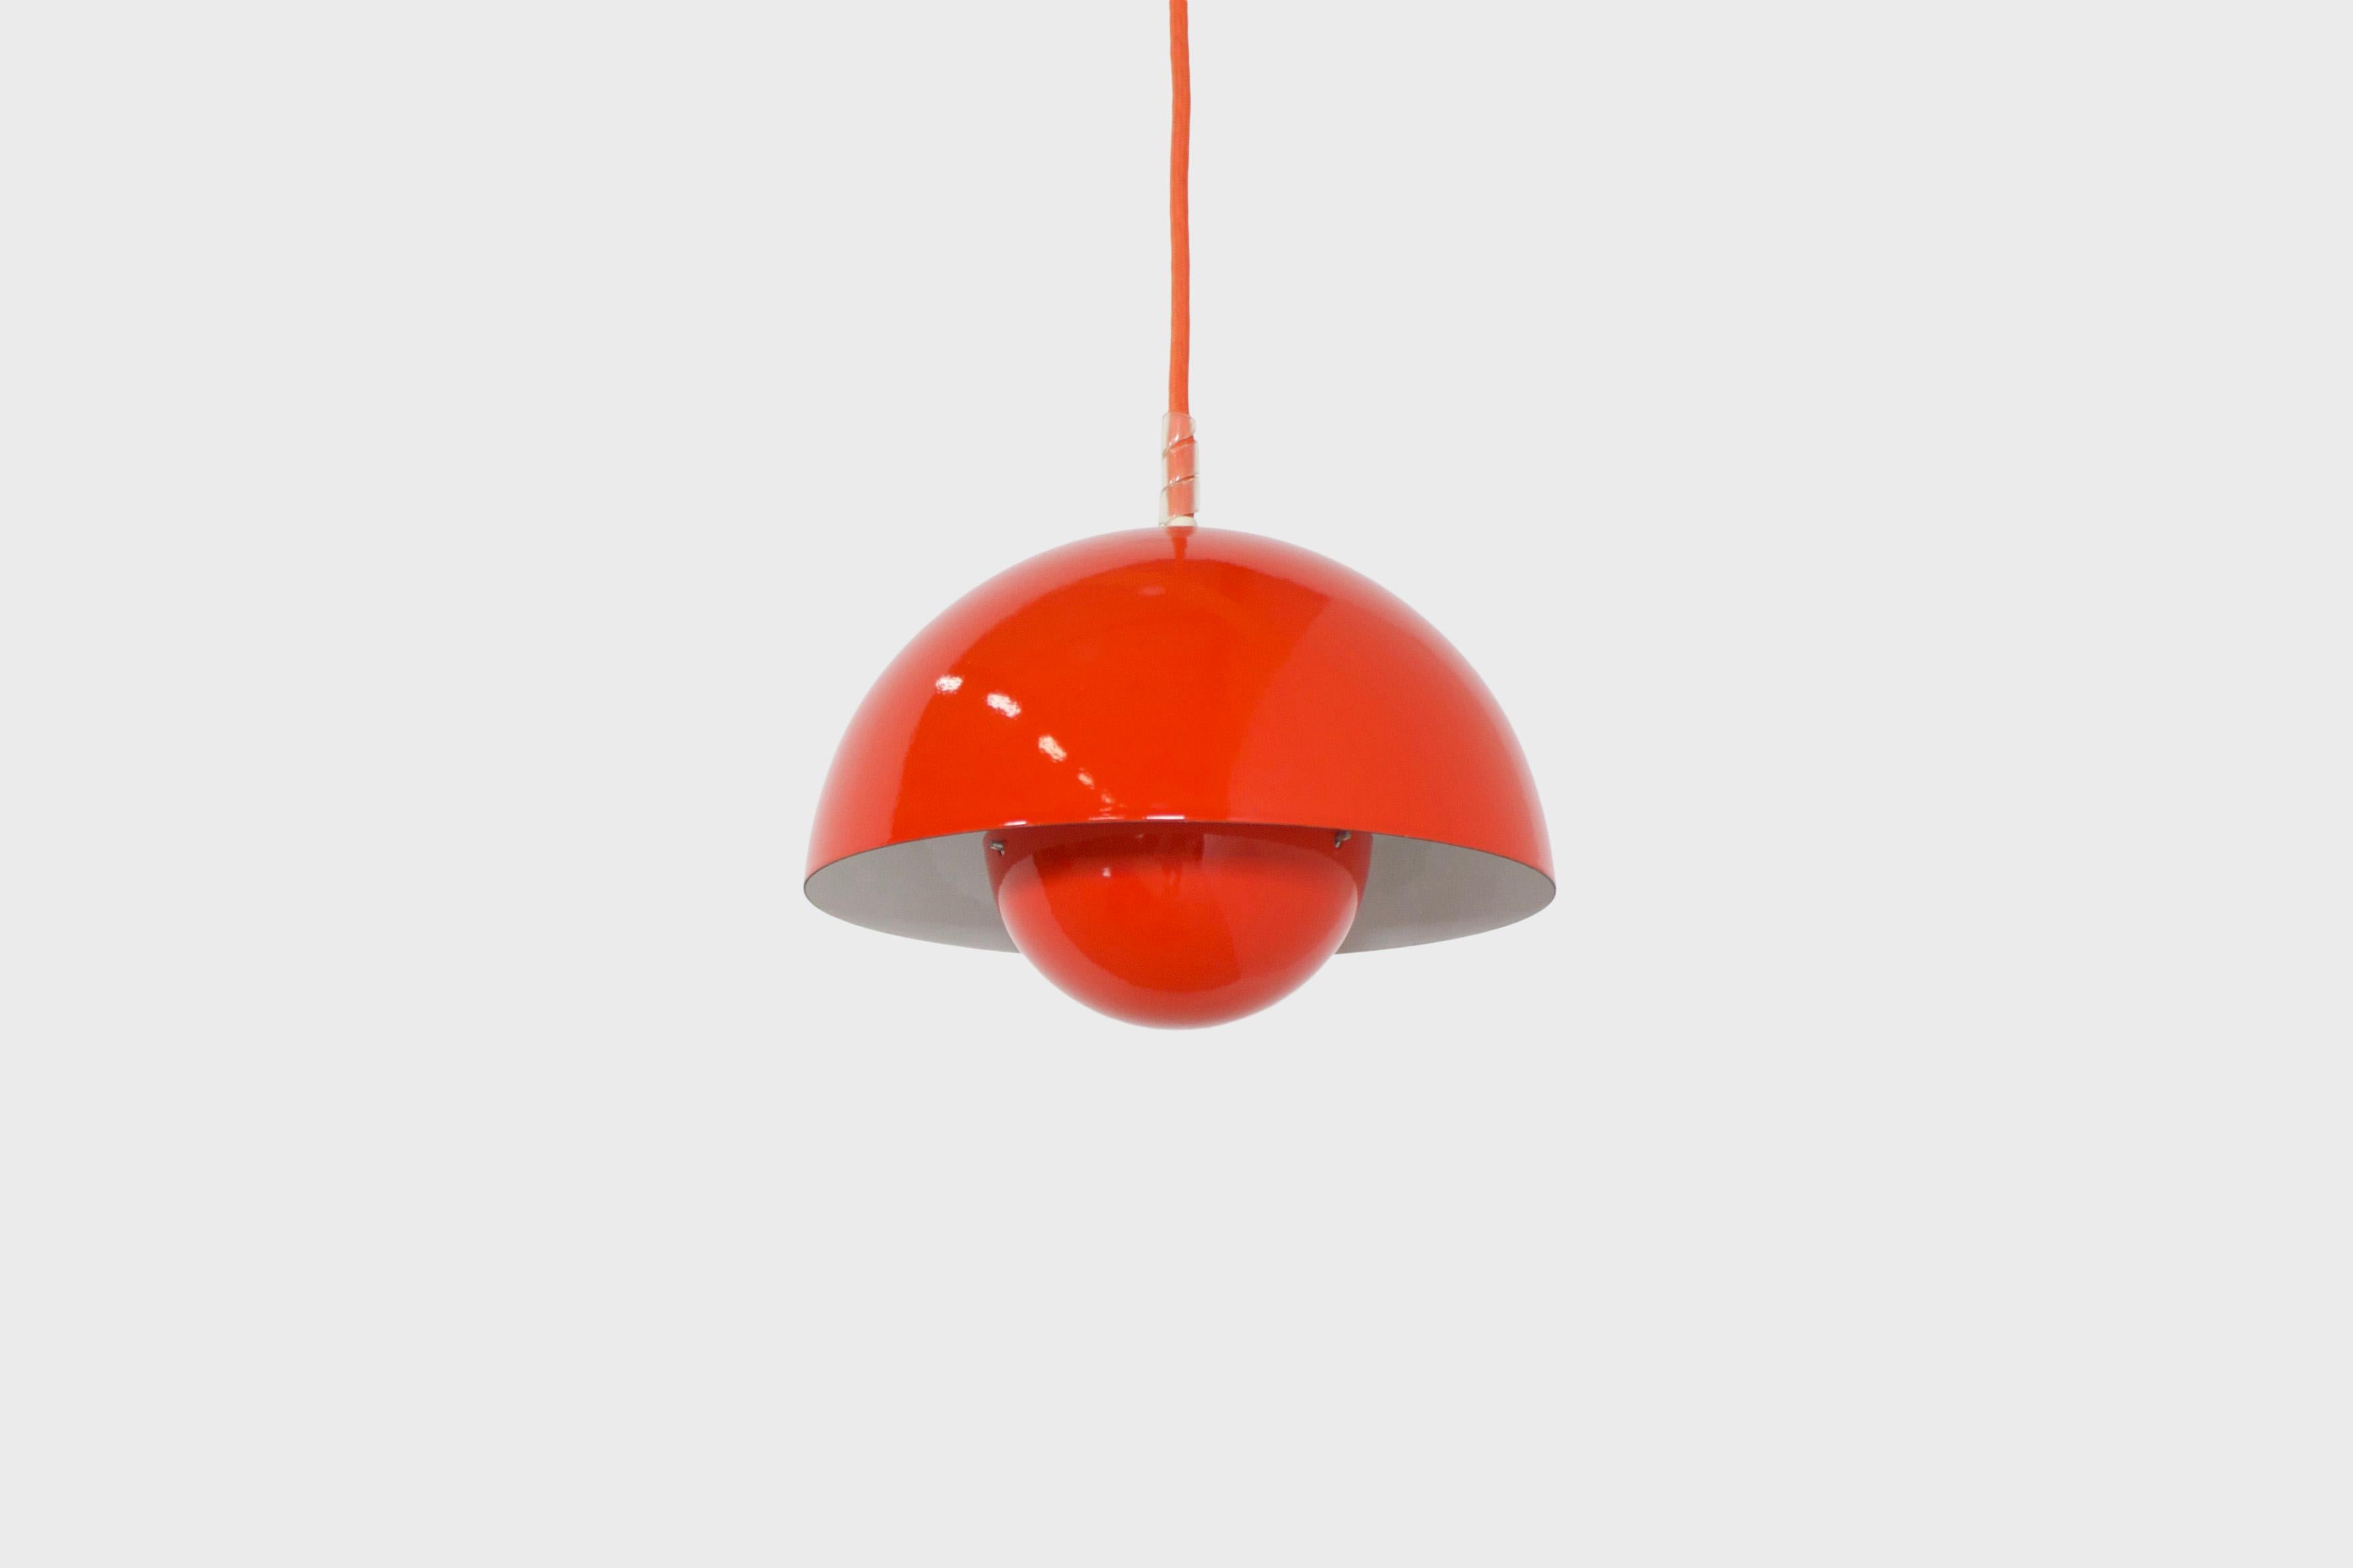 First edition VP1 flowerpot pendants in excellent condition.

3 Lamps available.

Designed by Verner Panton in 1969

Manufactured by Louis Poulsen, Denmark

The lamps consist of an orange enameled lampshade consisting of two half spheres